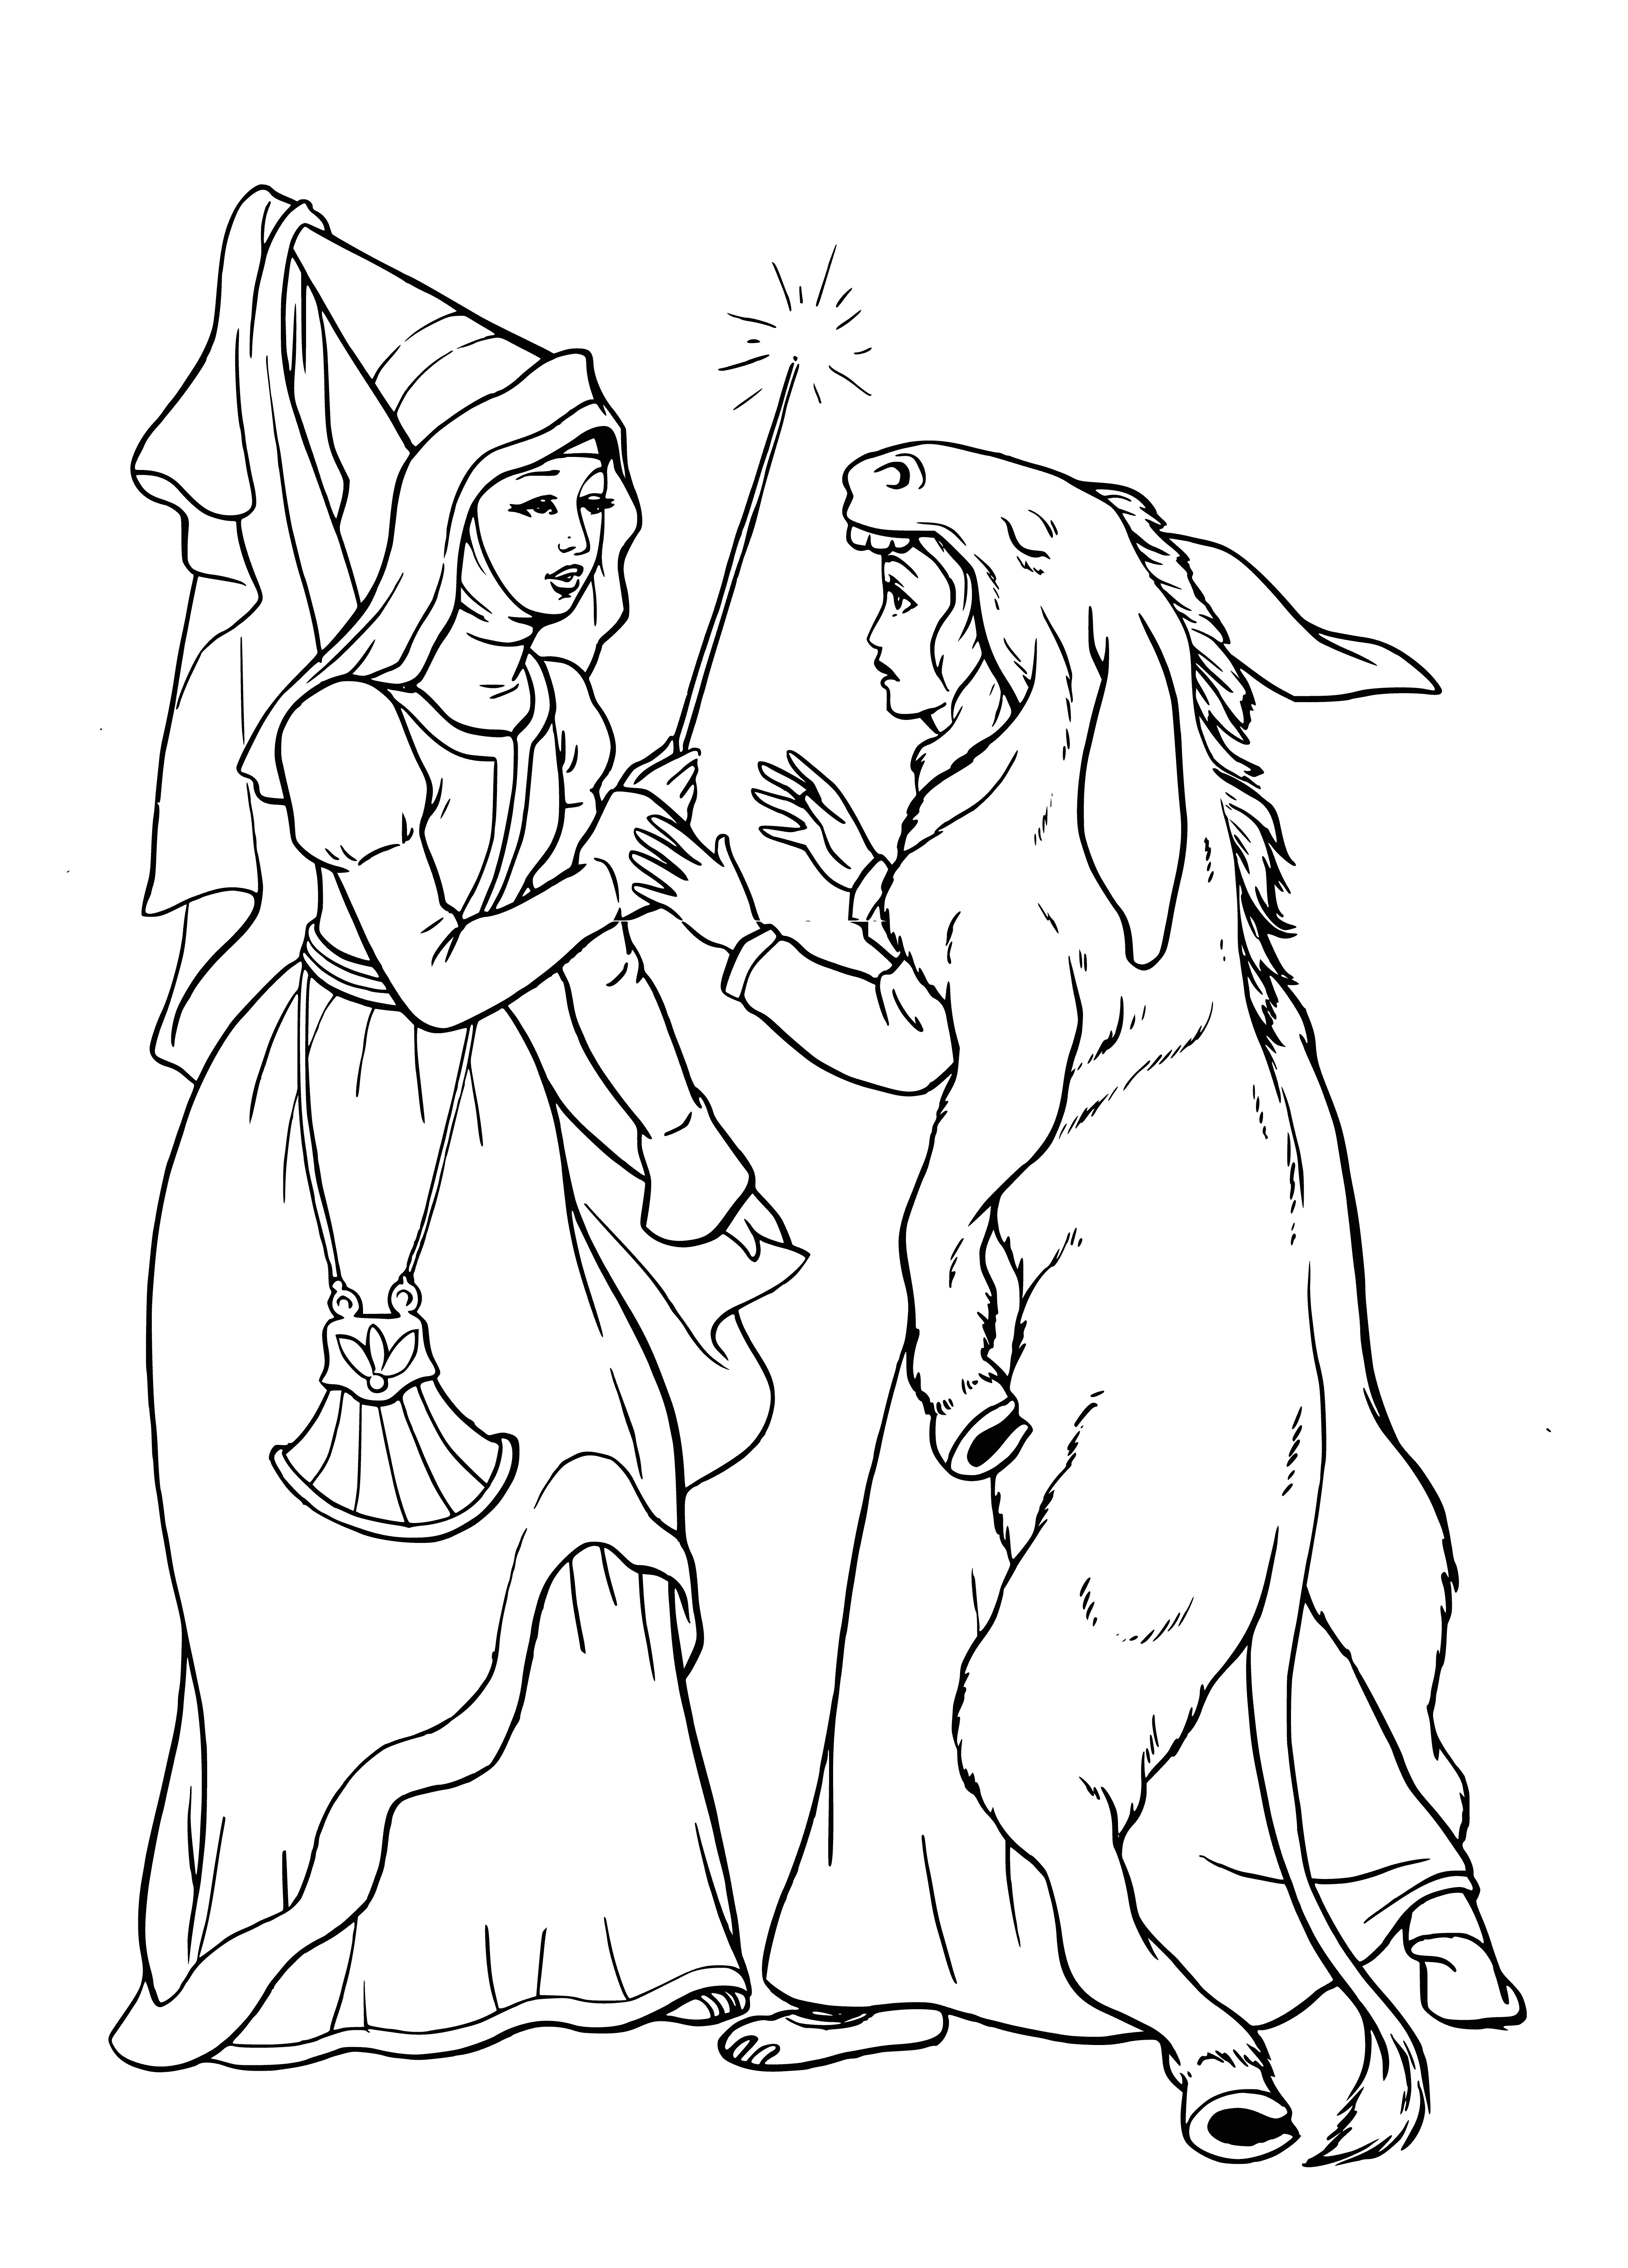 Princess and fairy coloring page